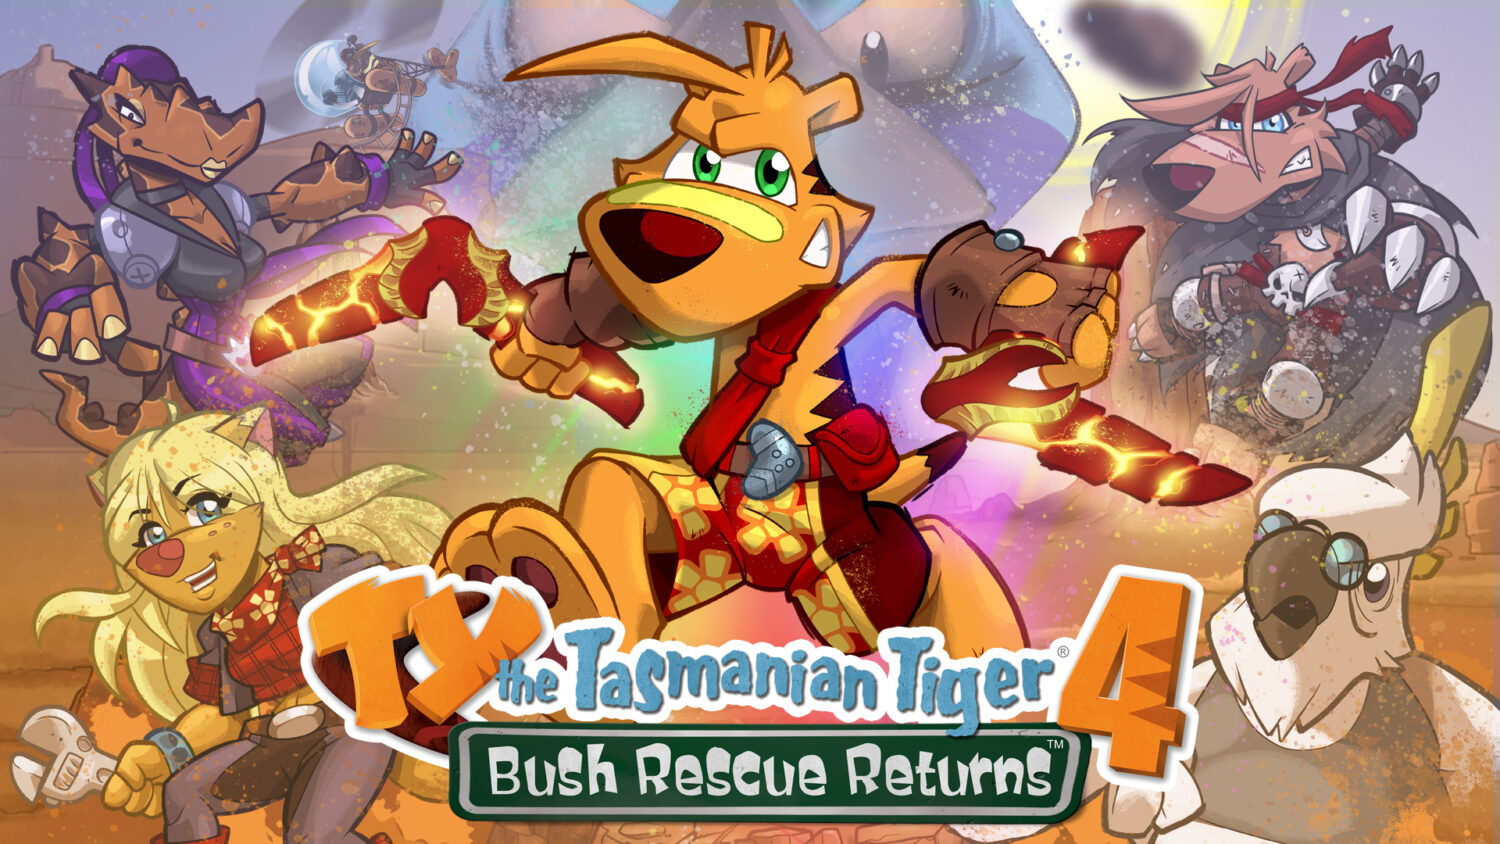 Ty The Tasmanian Tiger 4 - Nintendo Switch - interview with Krome Studios